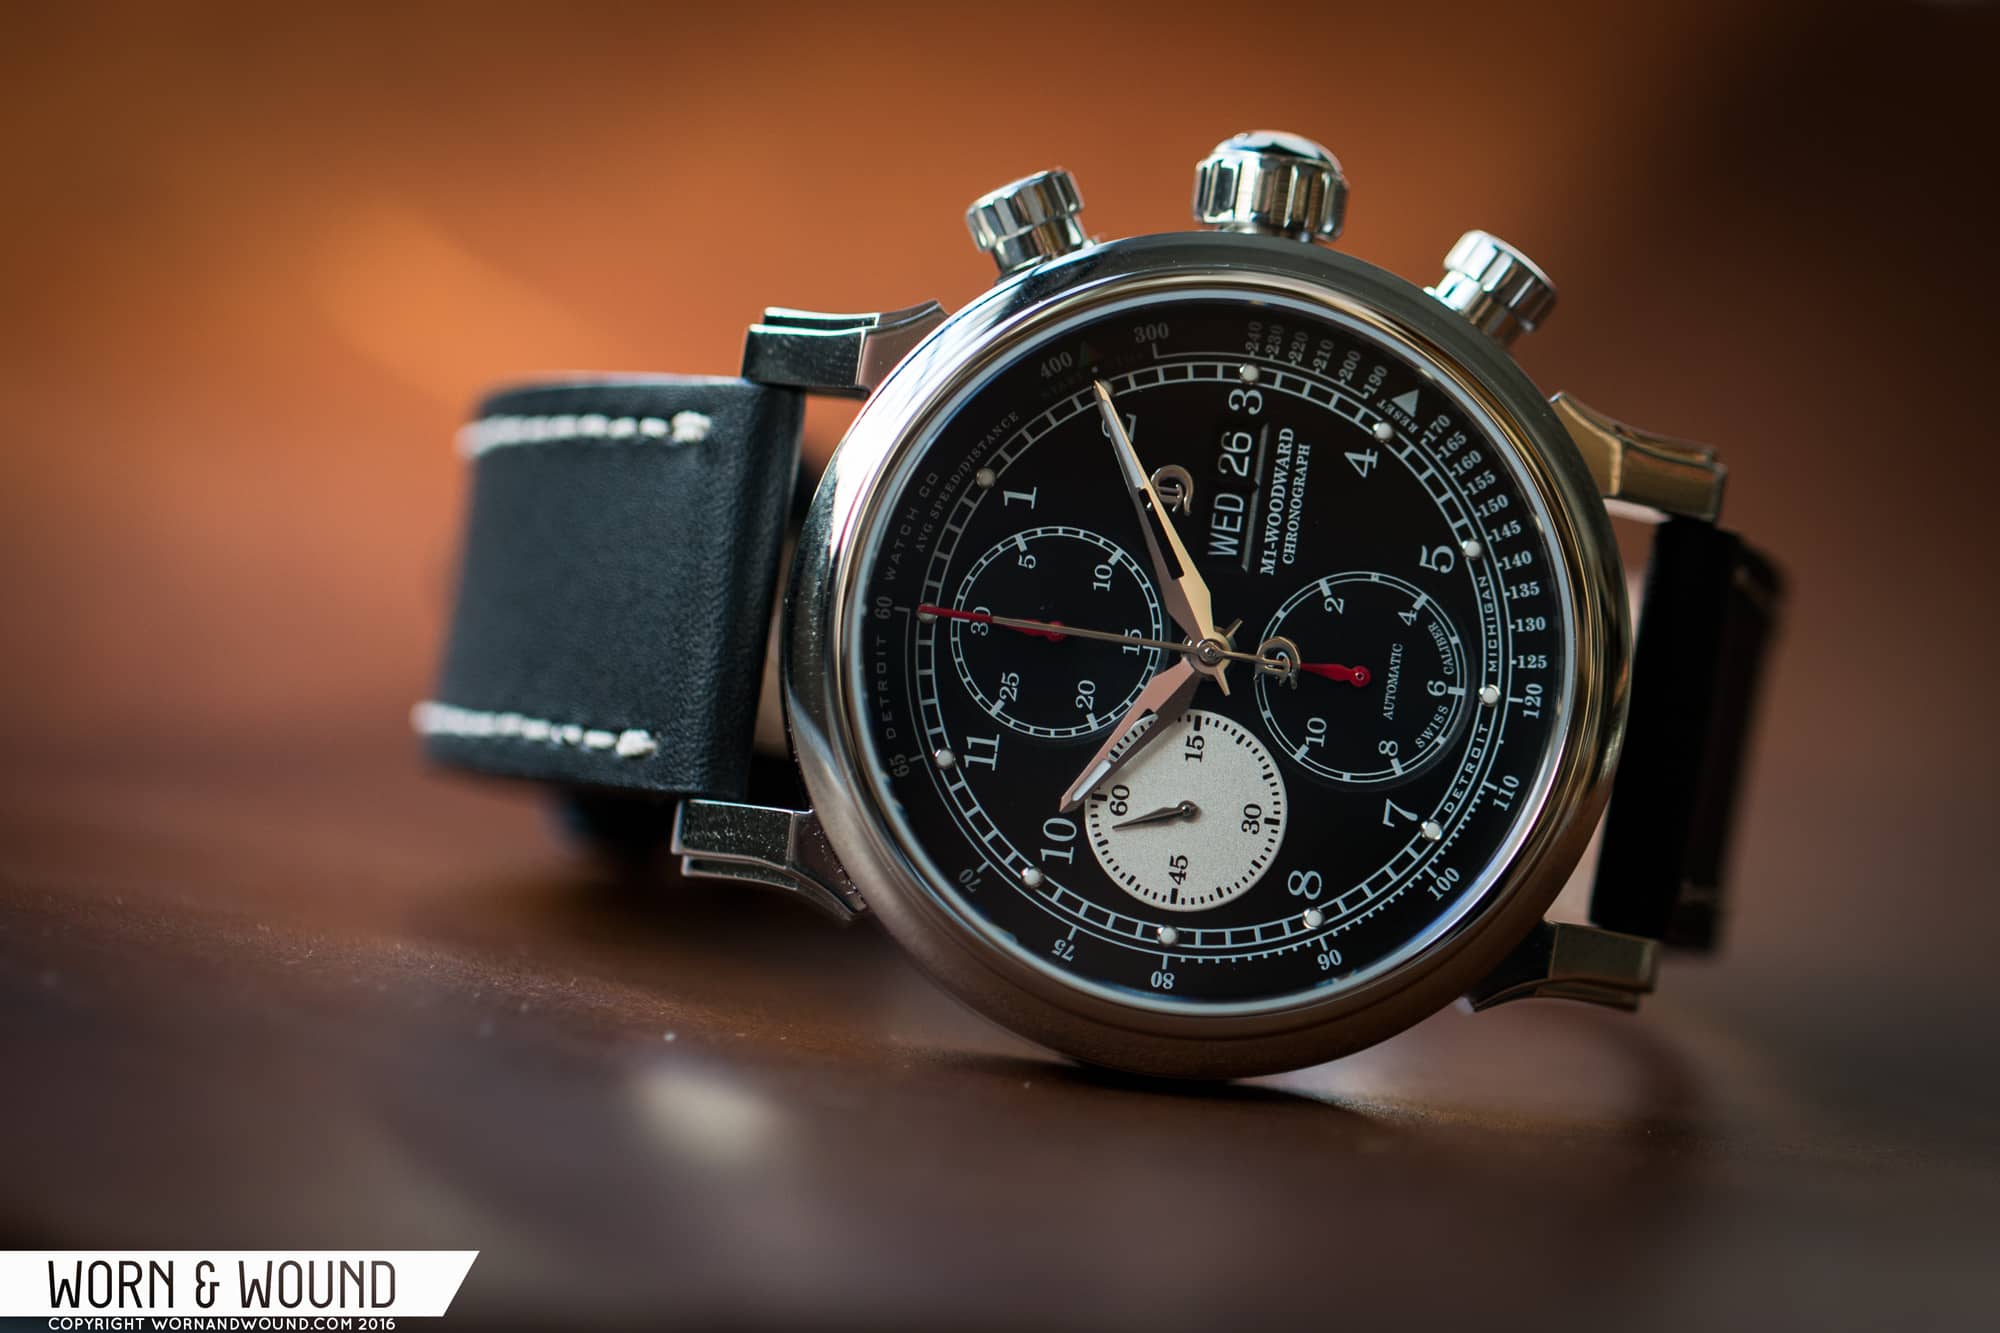 Detroit Watch Company M1-Woodward Chronograph Review